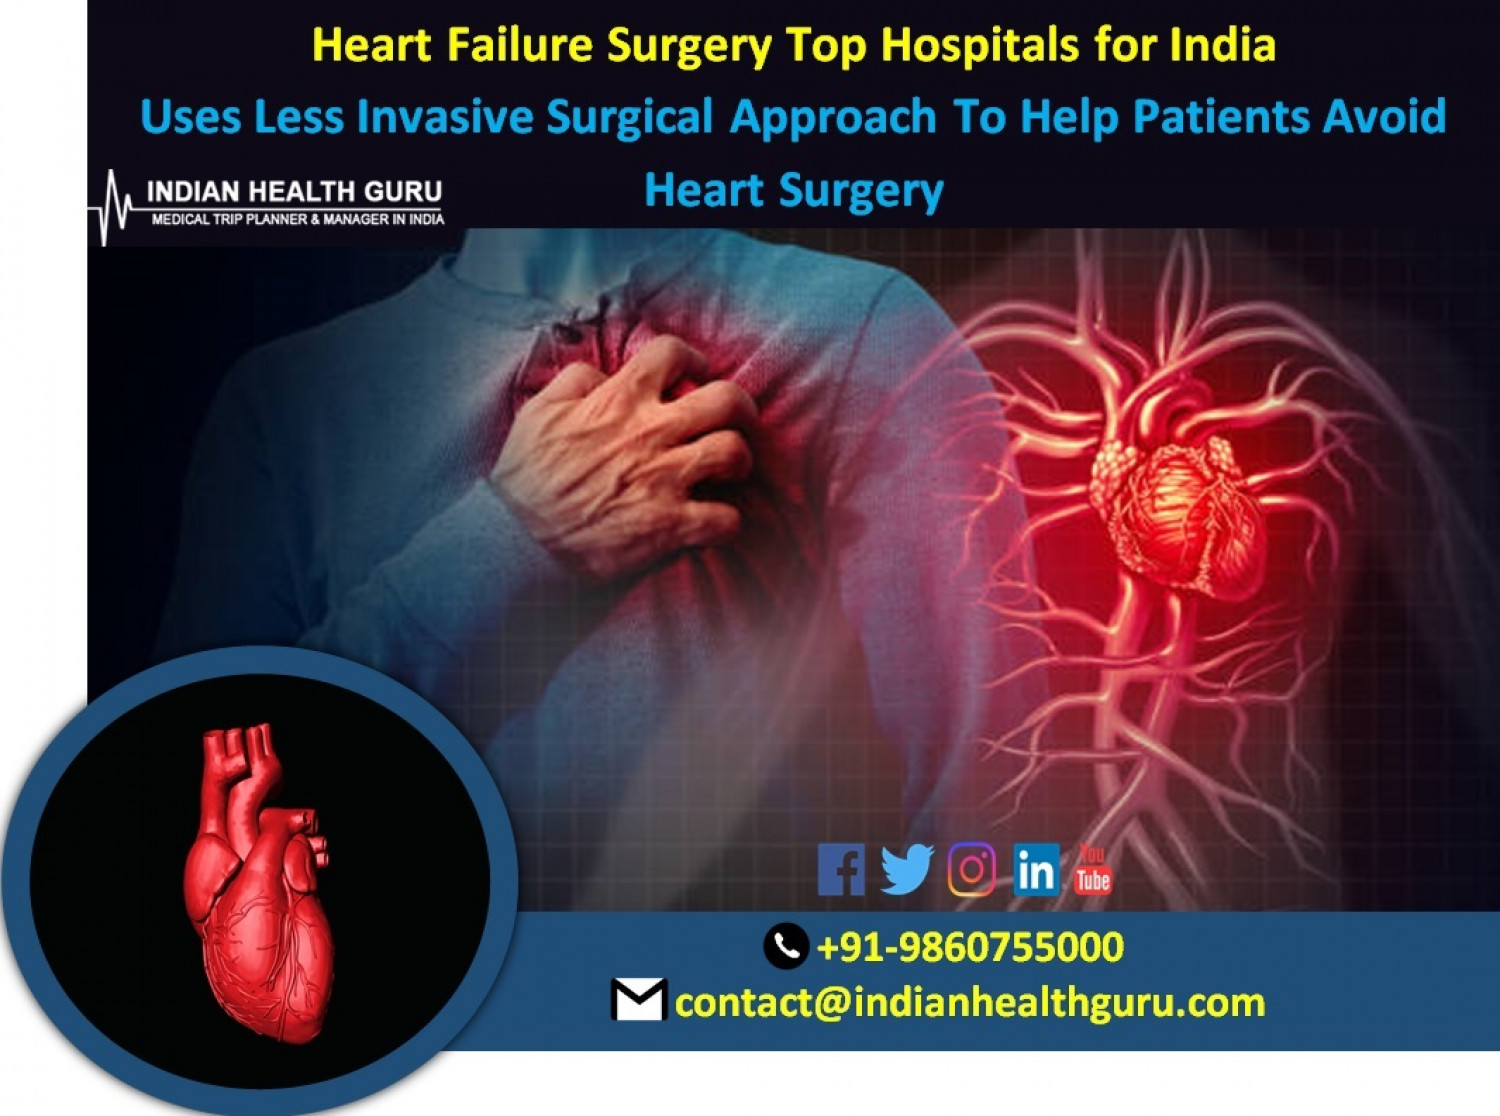 Top Hospitals for Heart Failure Surgery India Uses Less Invasive Surgical Approach To Help Patients Avoid Heart Surgery Infographic